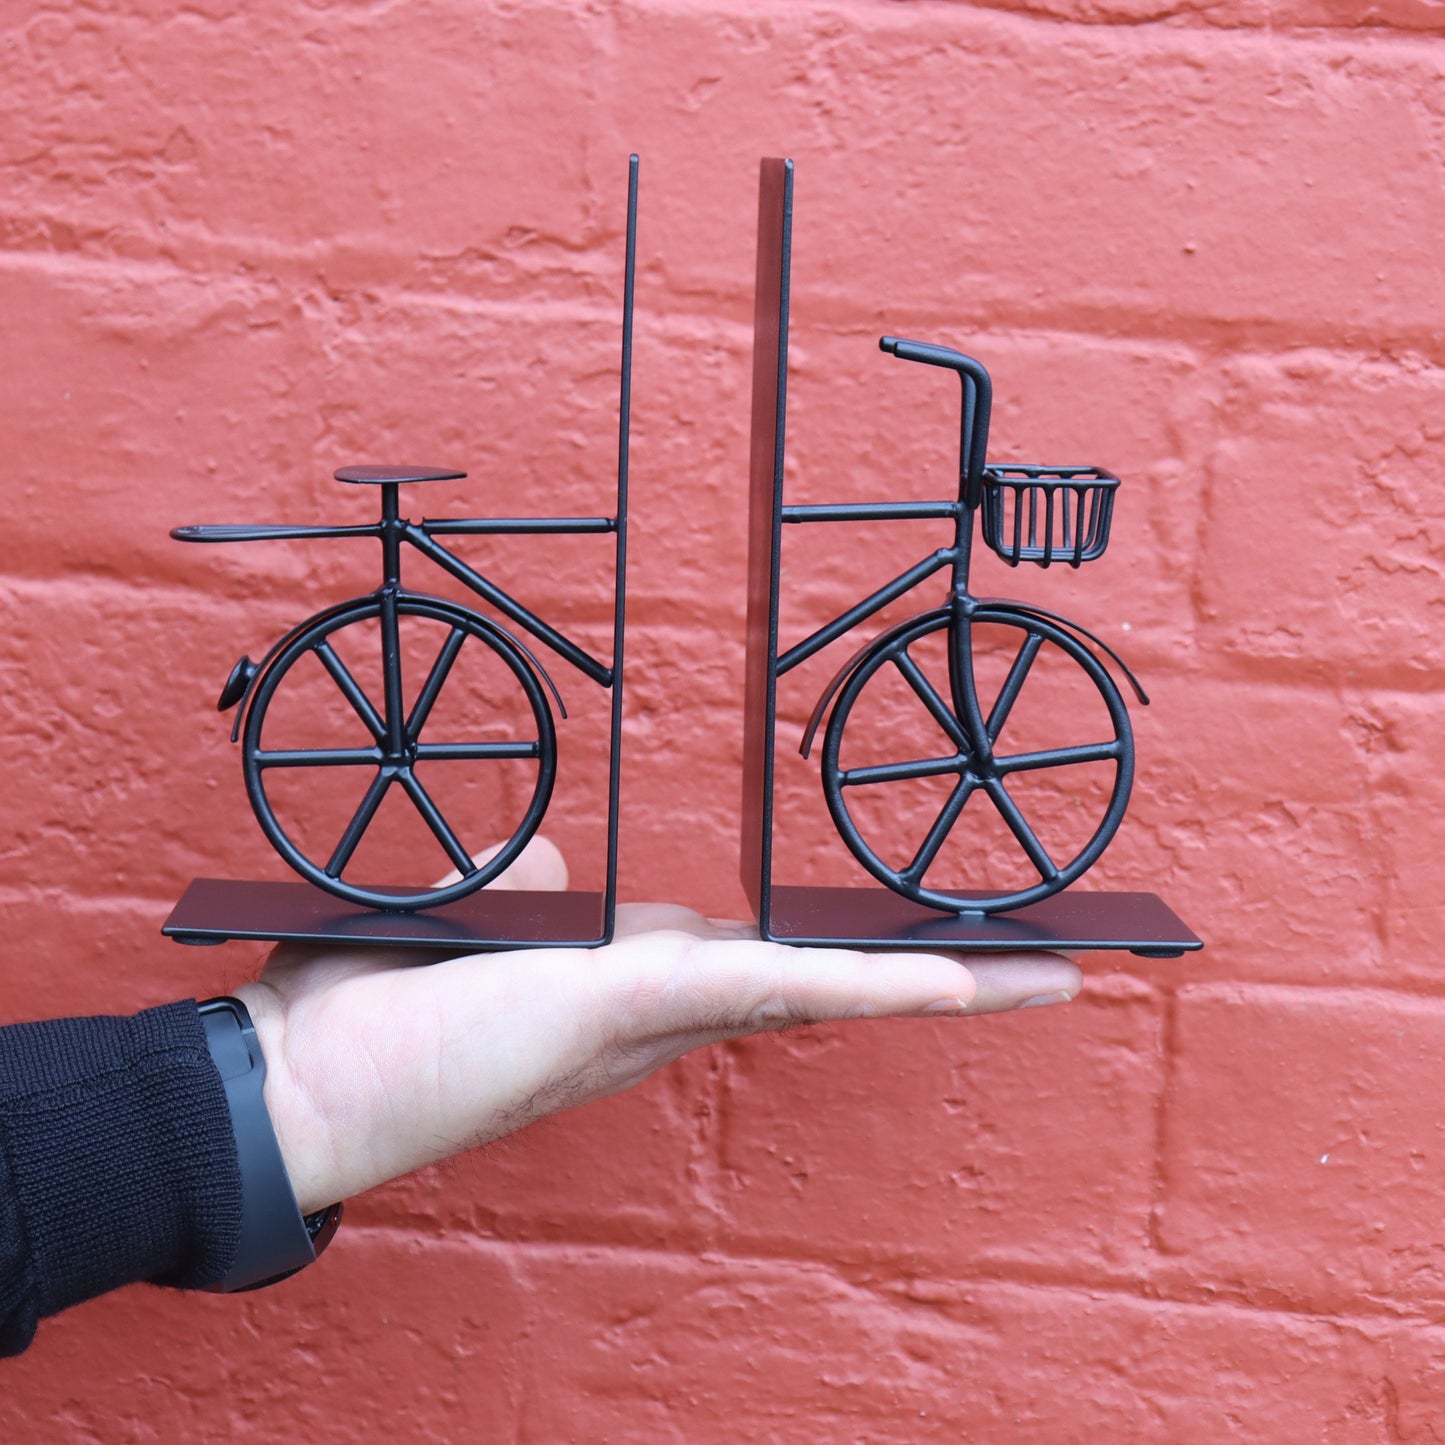 Handcrafted Black Bicycle Bookends, Industrial look Anti Skid, Gift for Book Lover - Aksa Home Decor 